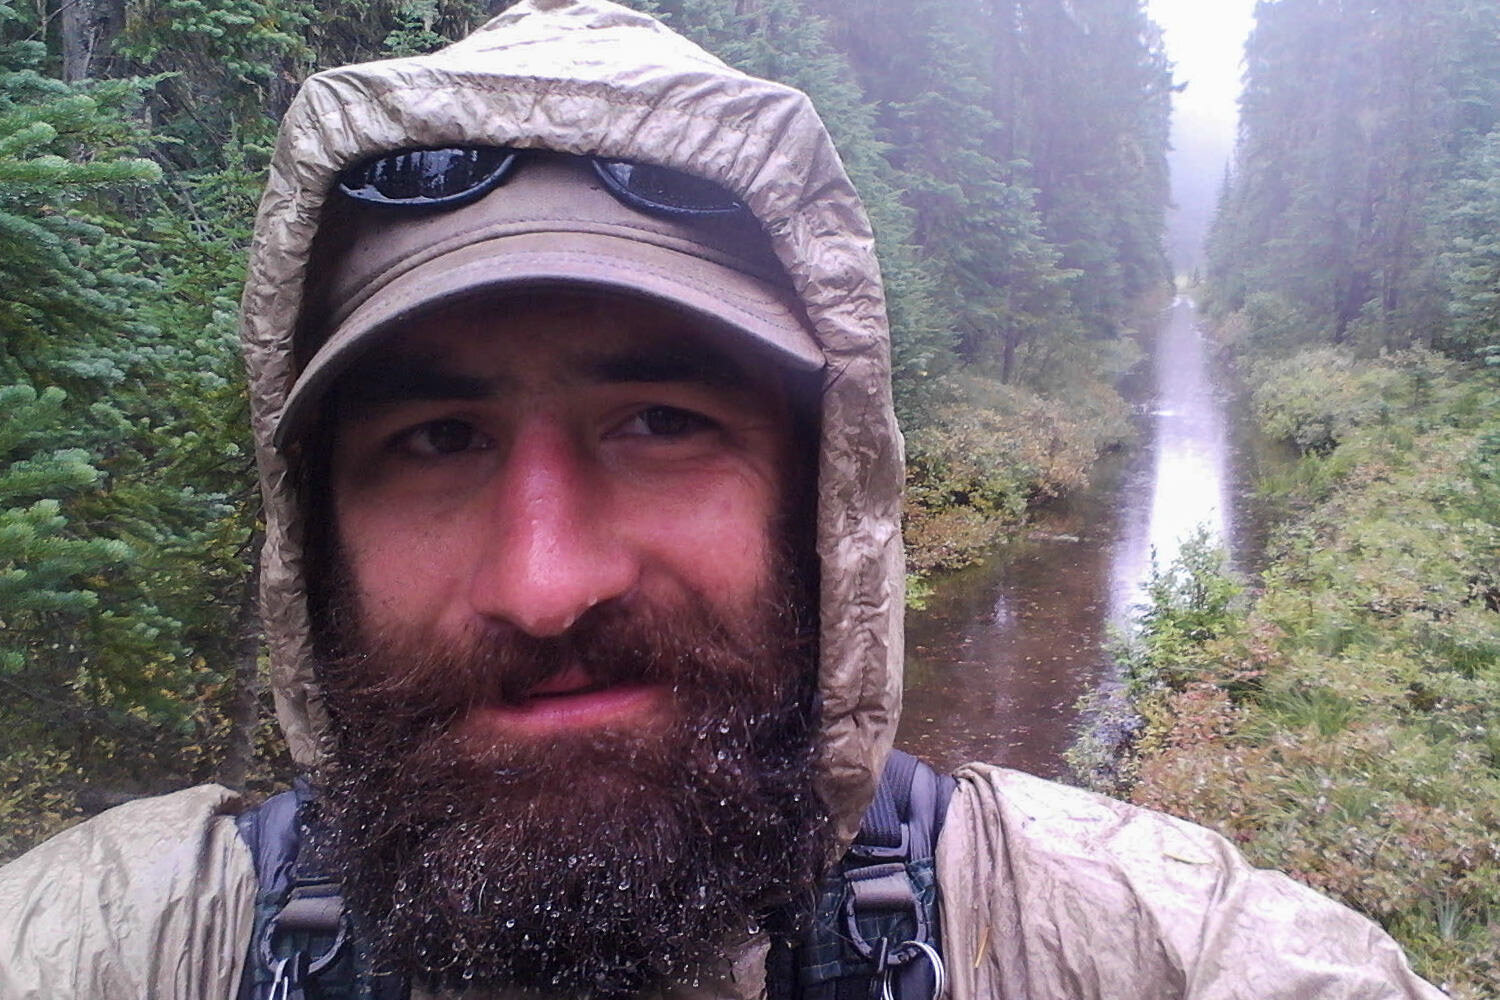 “Coincidence” facing RElentlessly wet conditions in the North Cascades